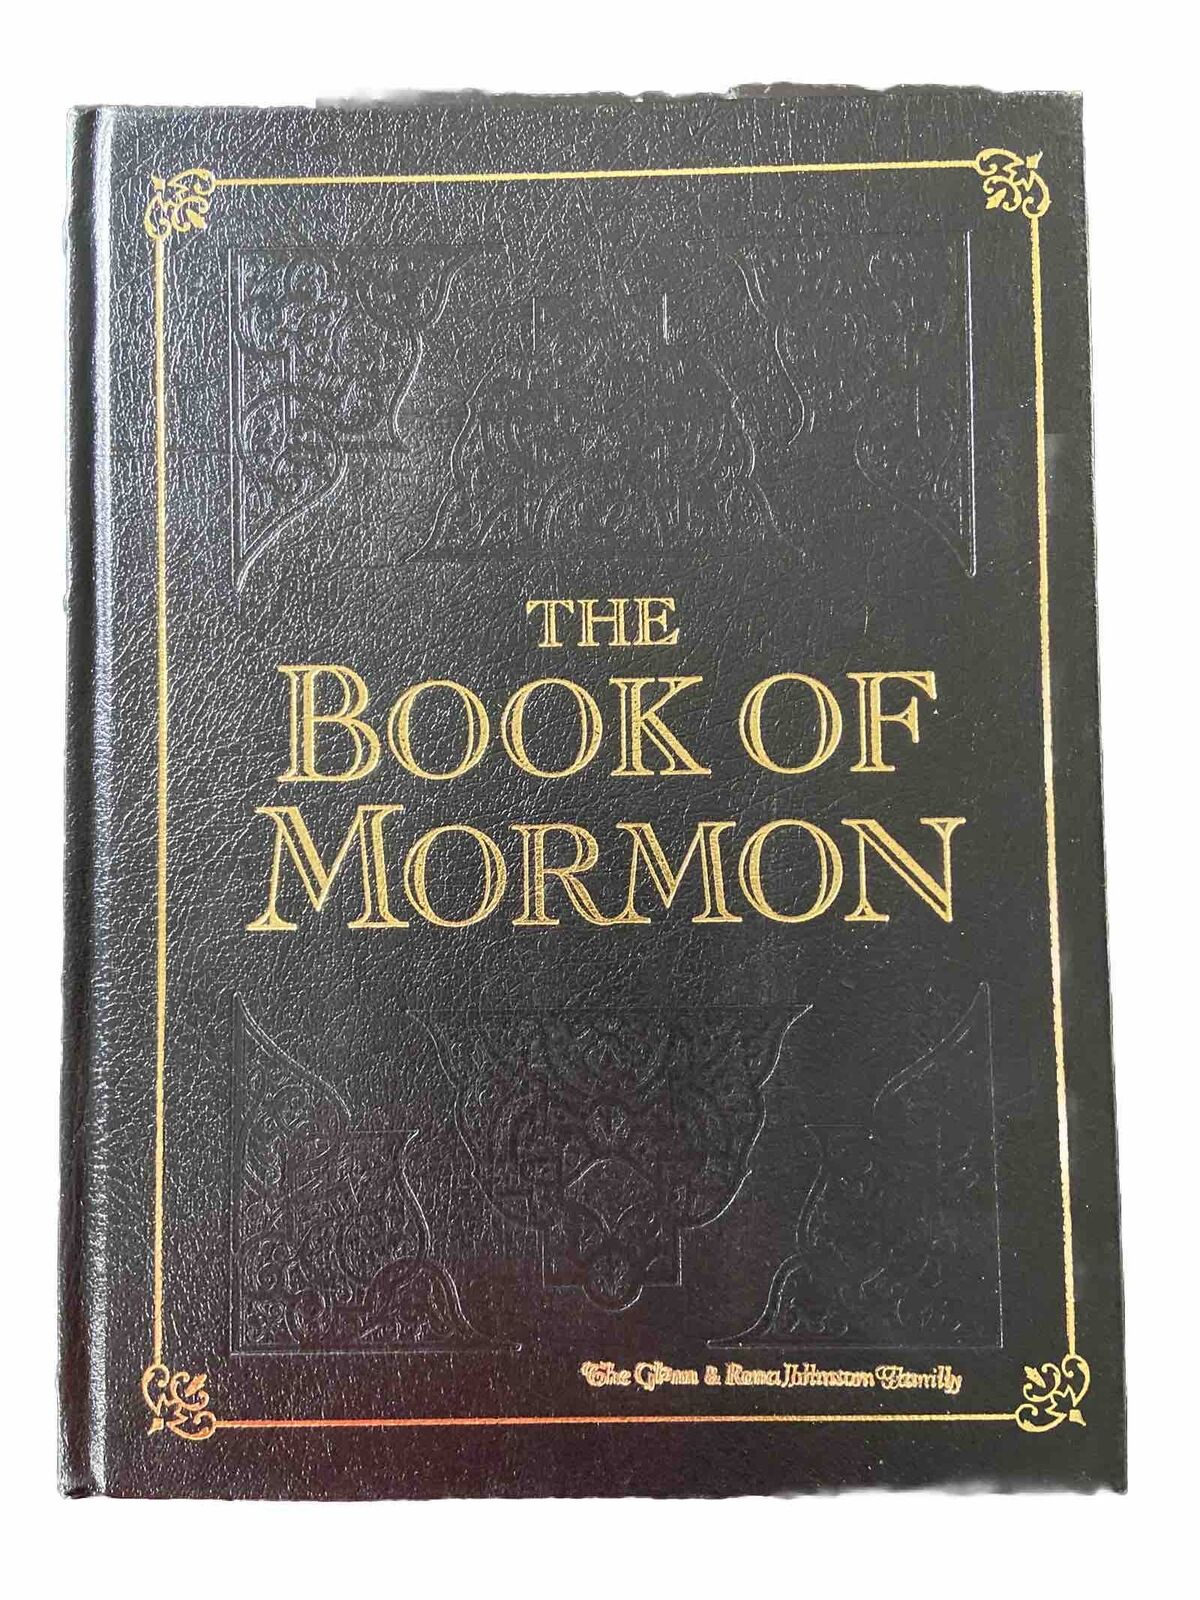 The Book of Mormon With Paintings By Minerva Kohl help Teichert